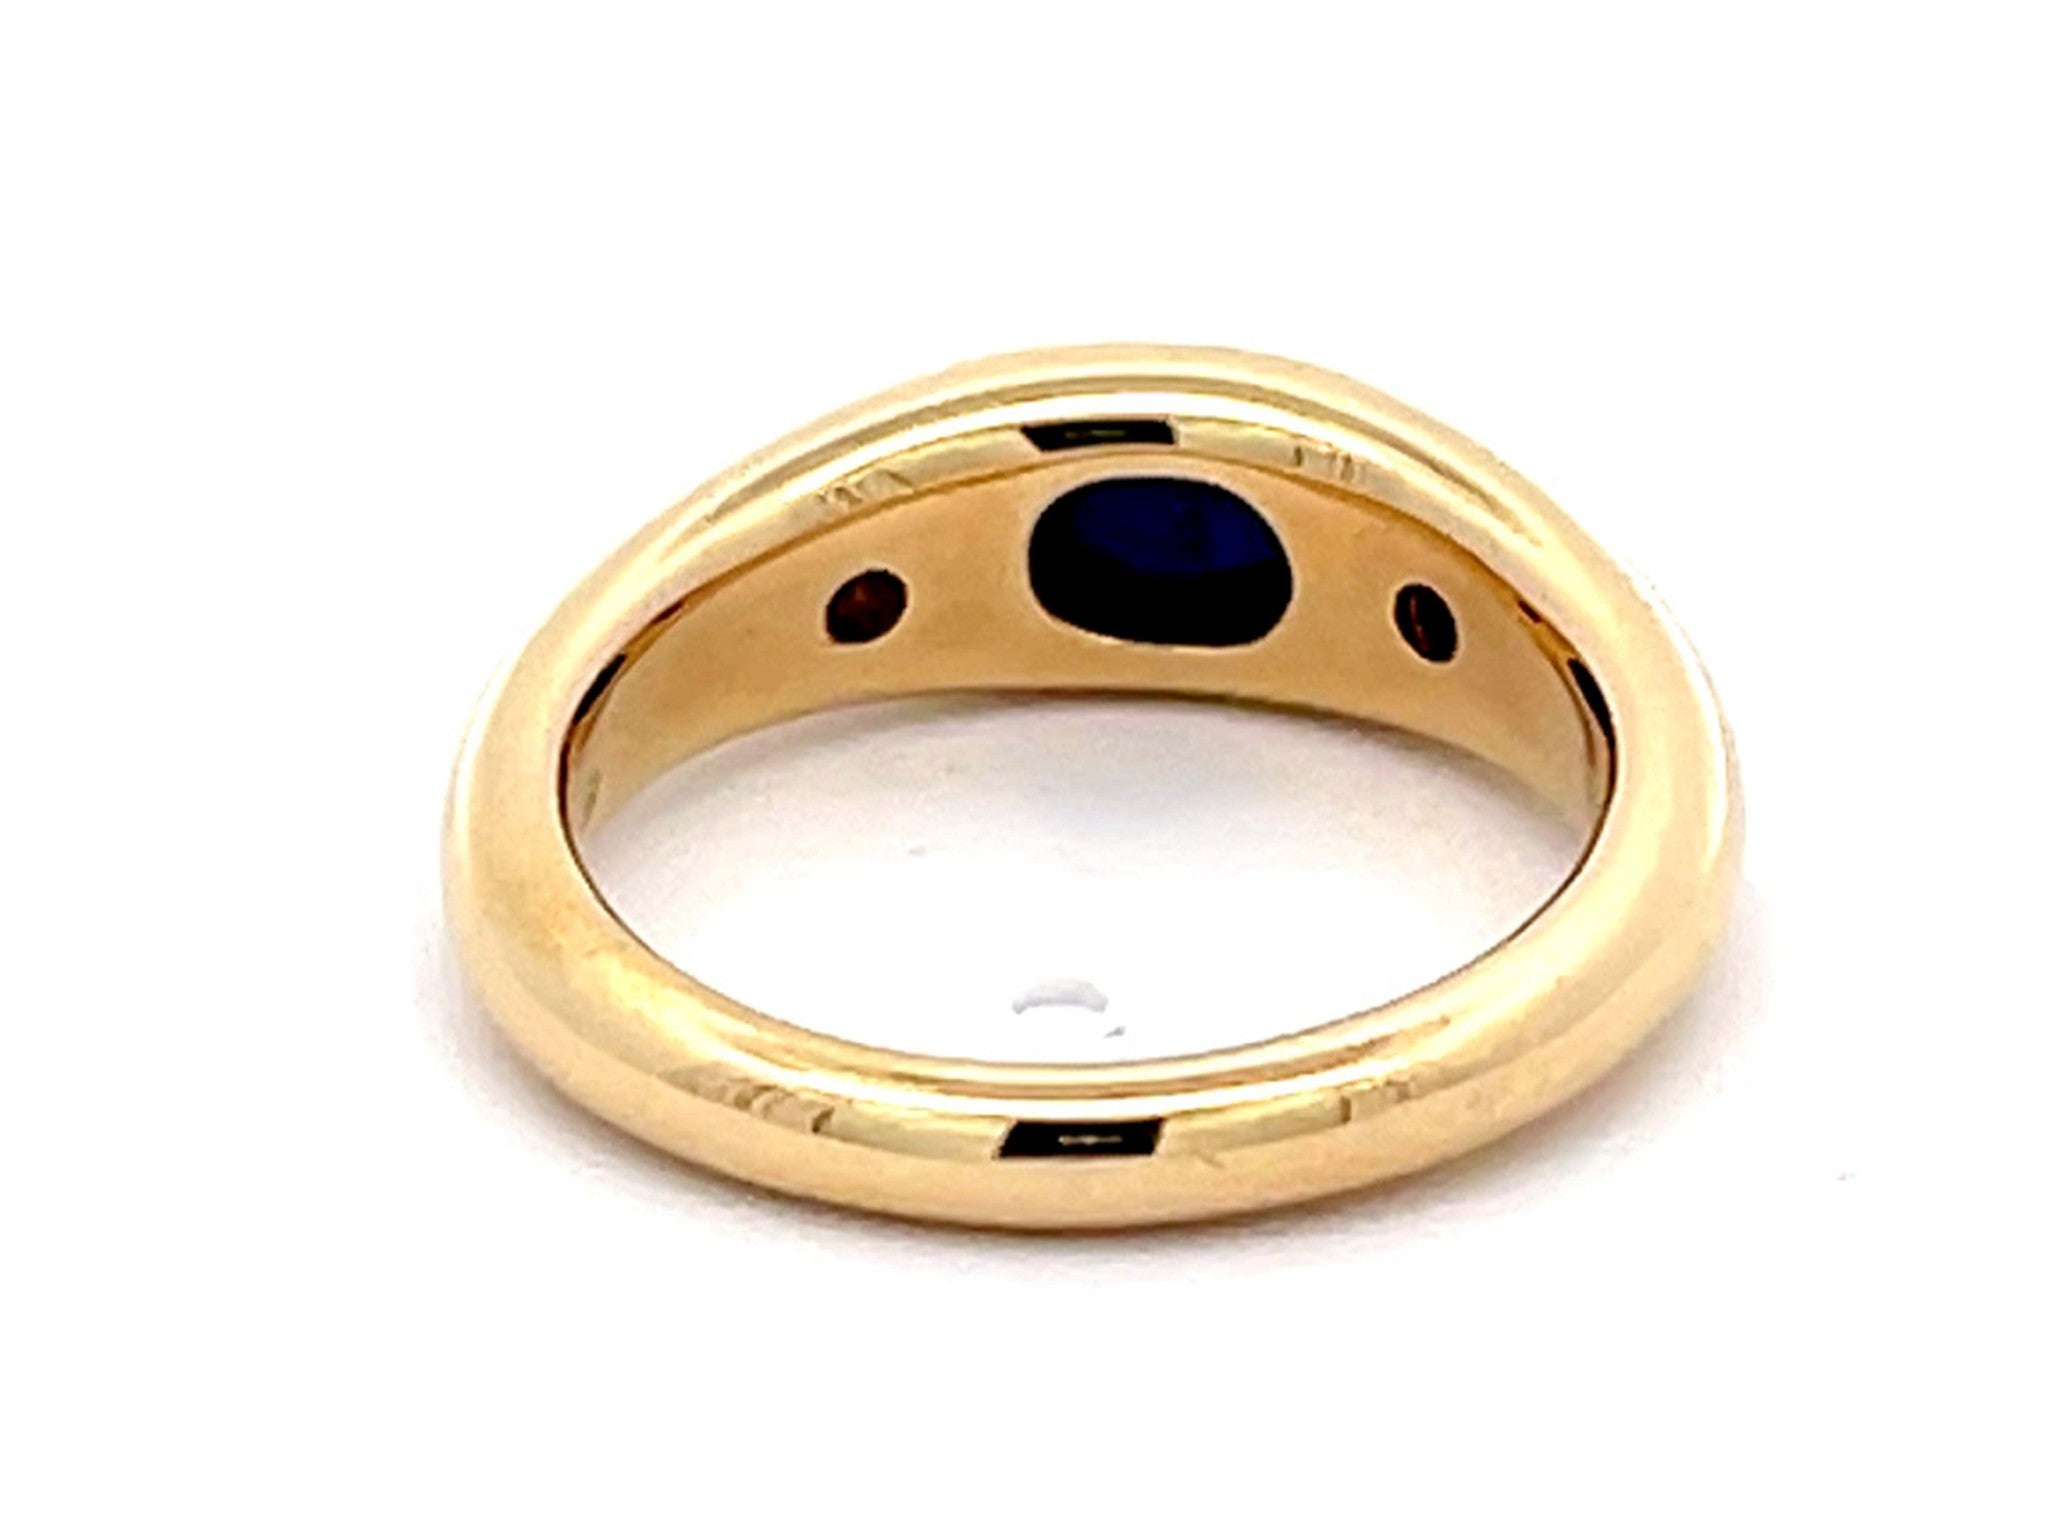 Oval Cabochon Blue Sapphire Diamond Ring in 18k Yellow Gold